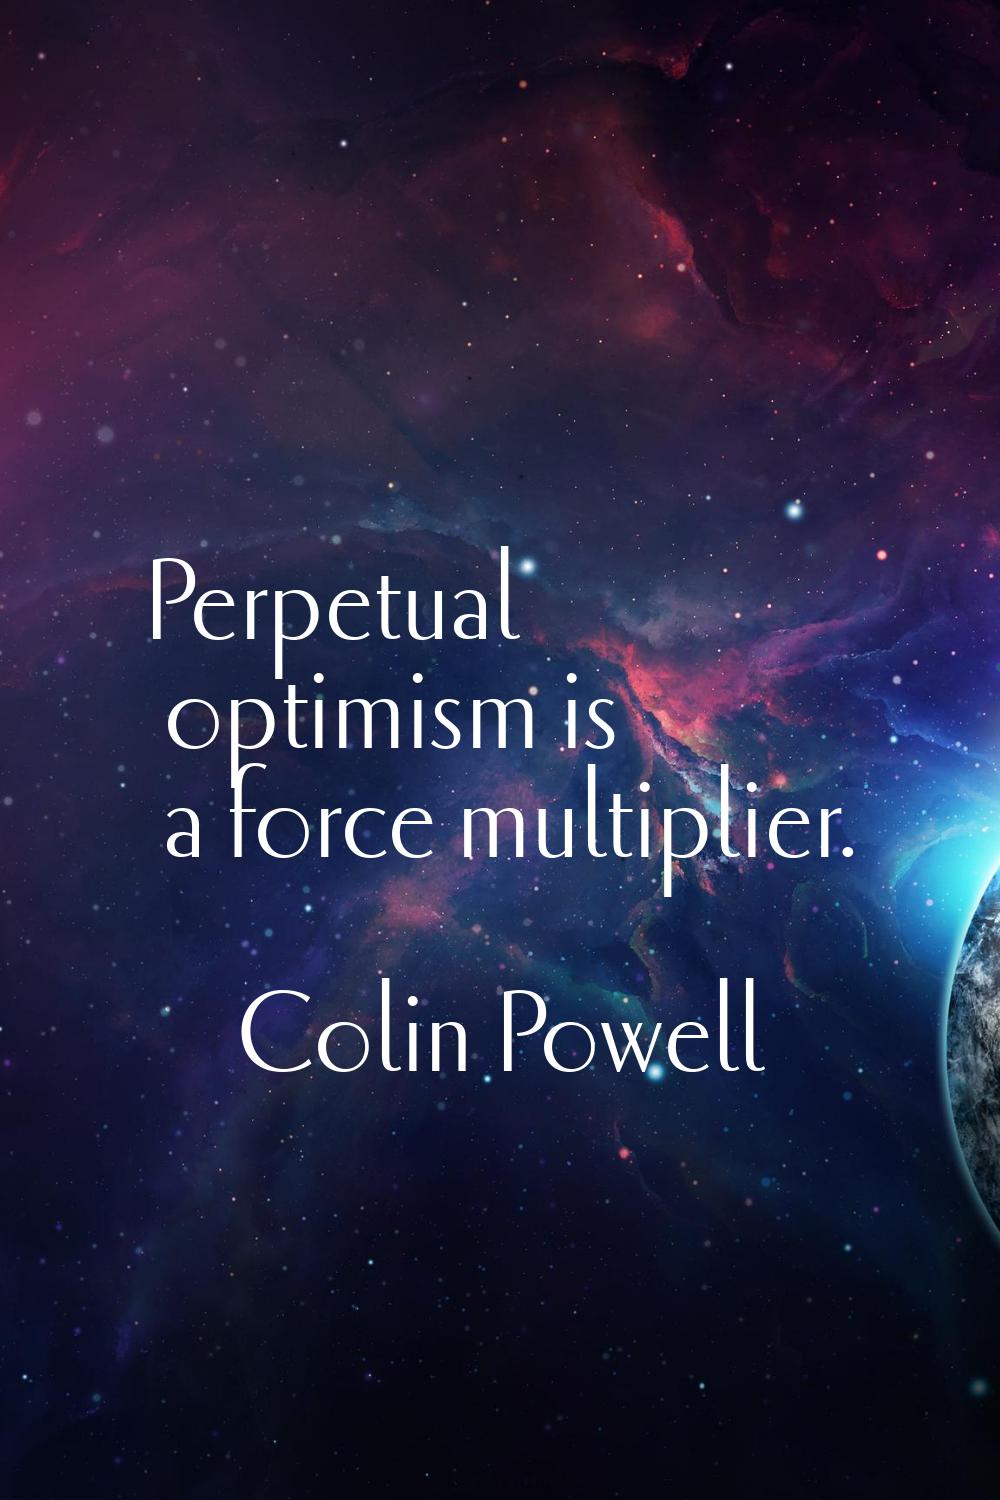 Perpetual optimism is a force multiplier.